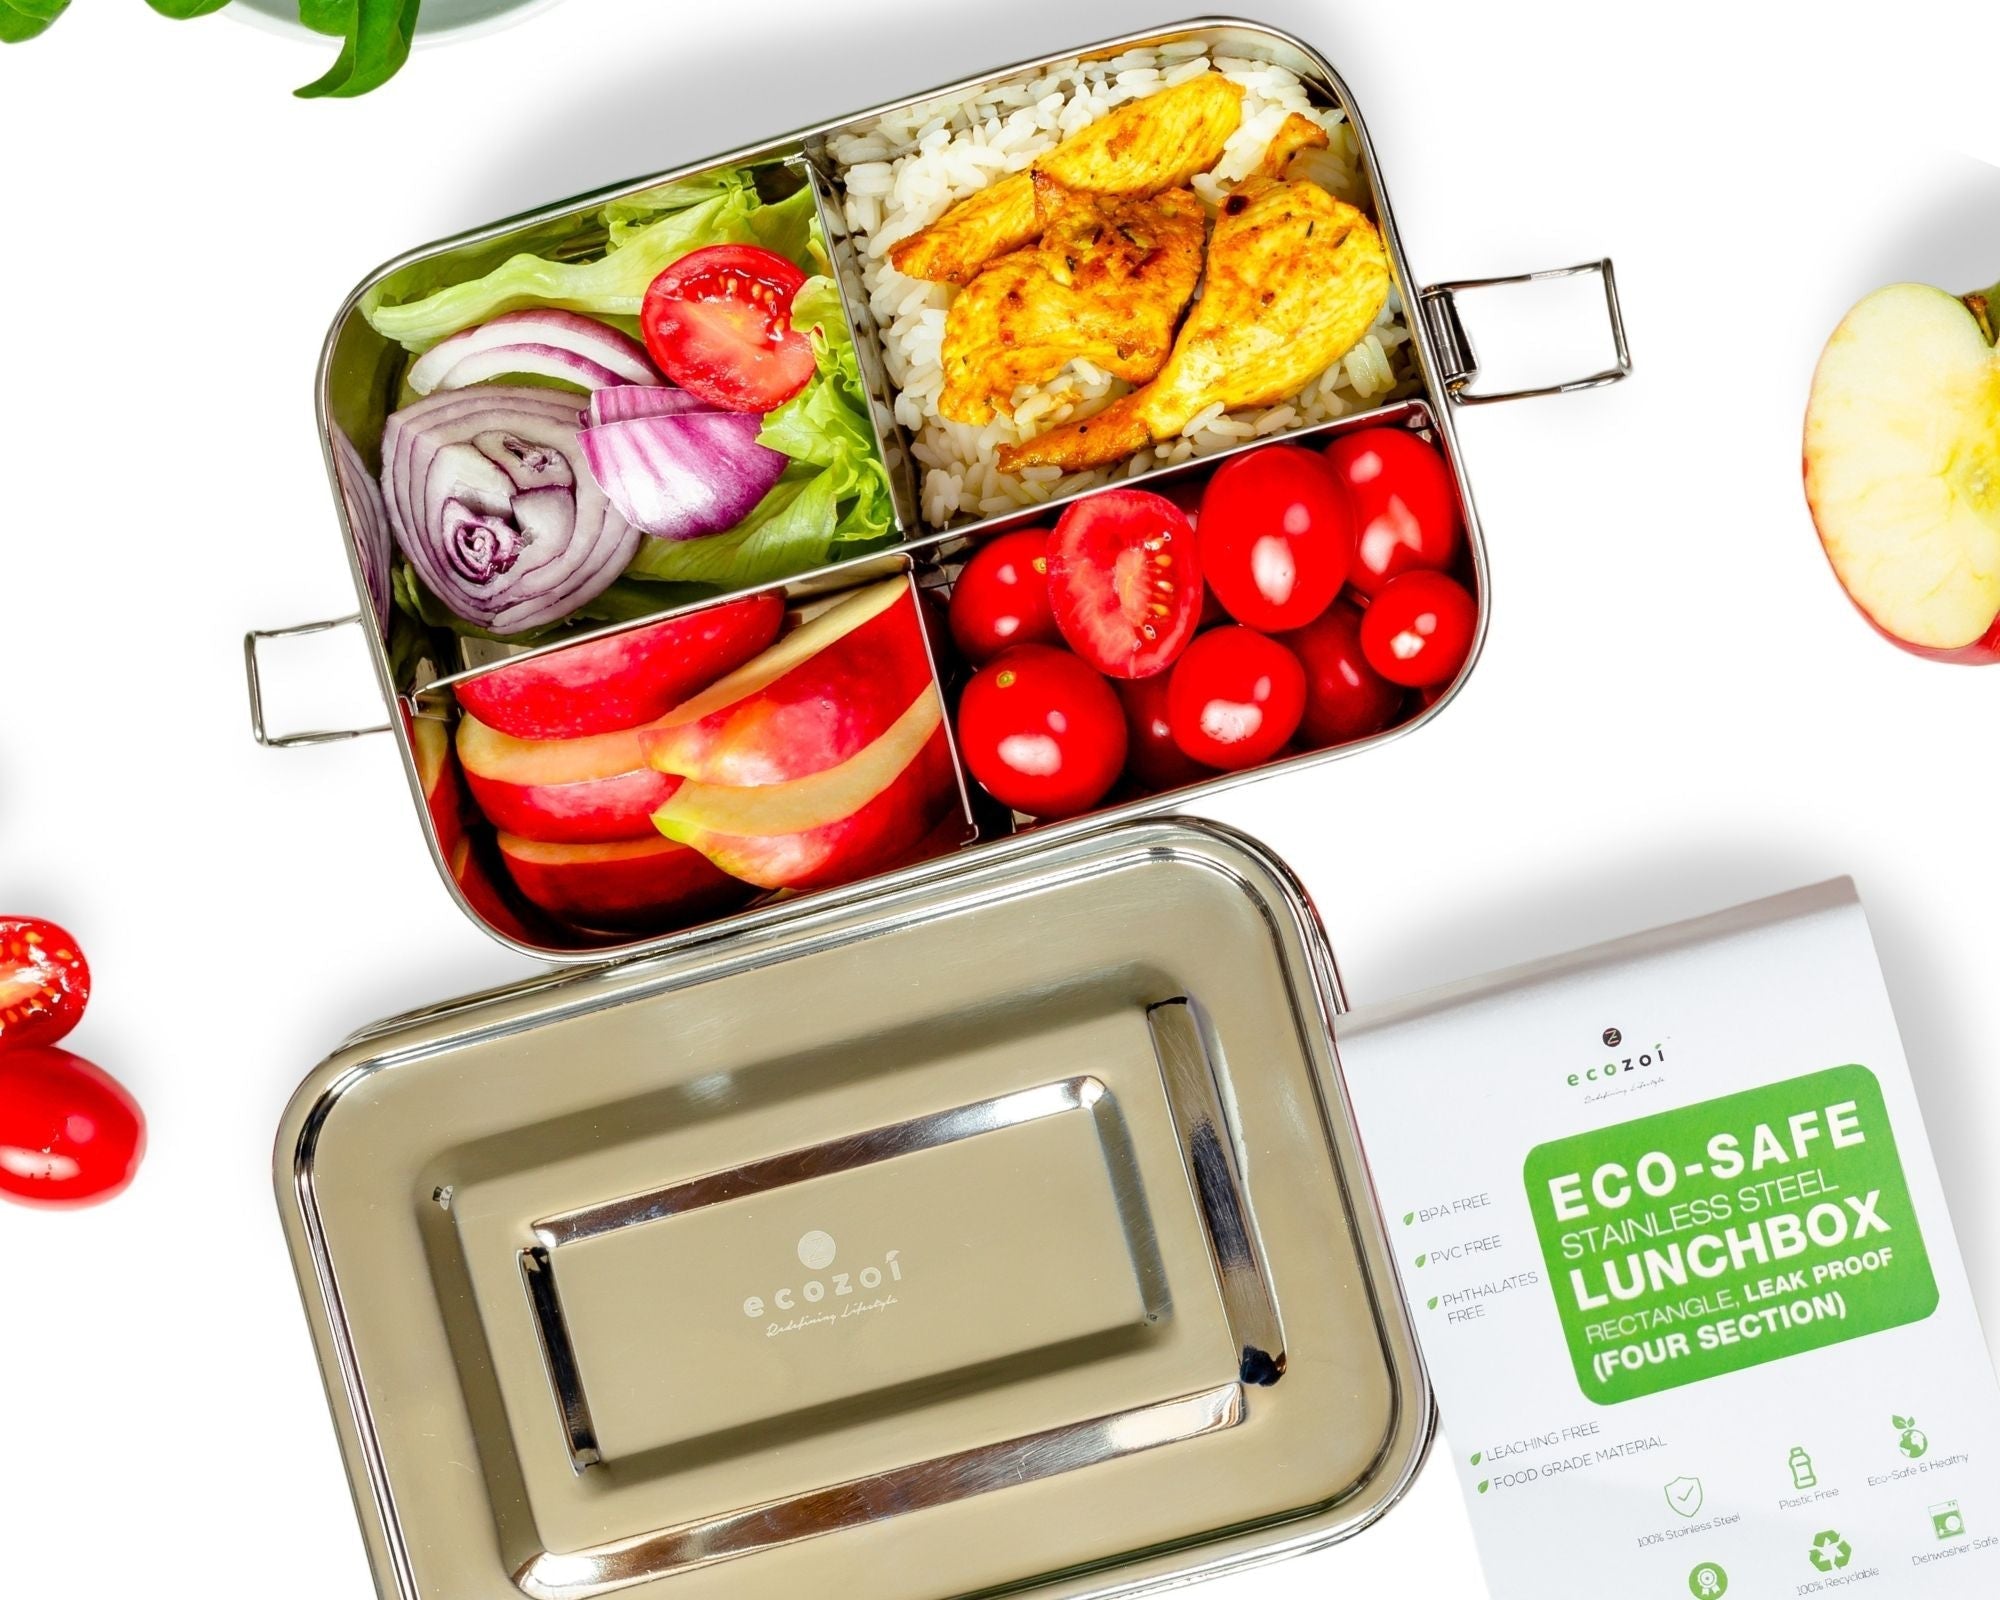 Stainless Steel Eco Lunch Box, Leak Proof, 4 Compartment, 50 Oz or 1500 ml Ecozoi 